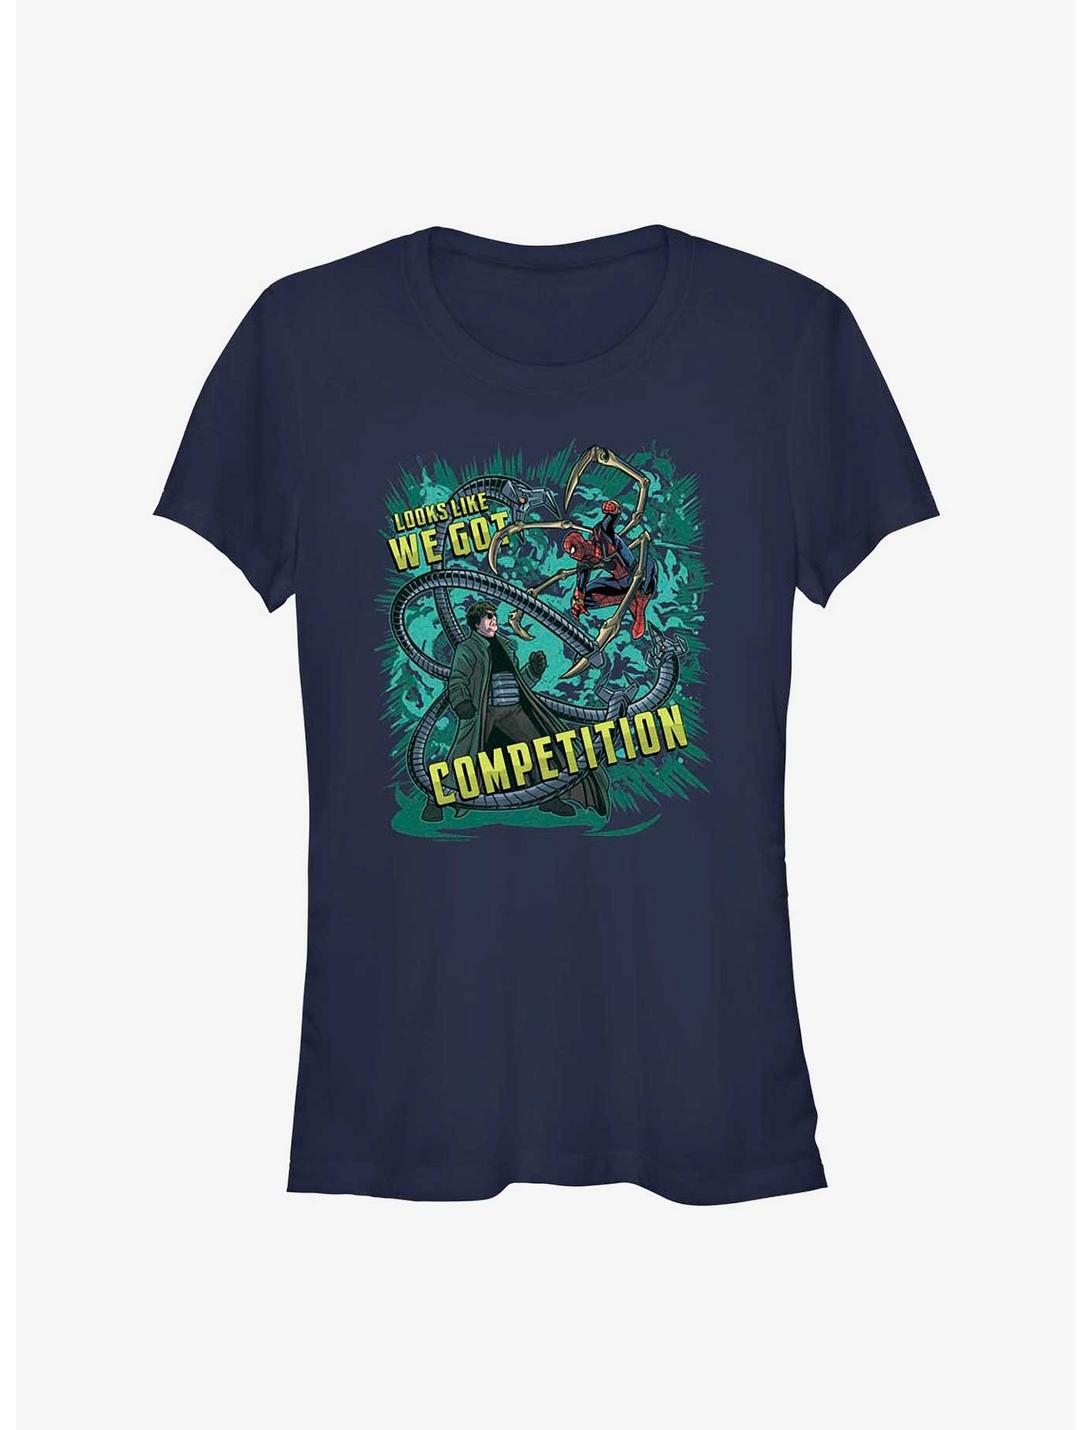 Marvel Spider-Man: No Way Home Competition Girls T-Shirt, NAVY, hi-res